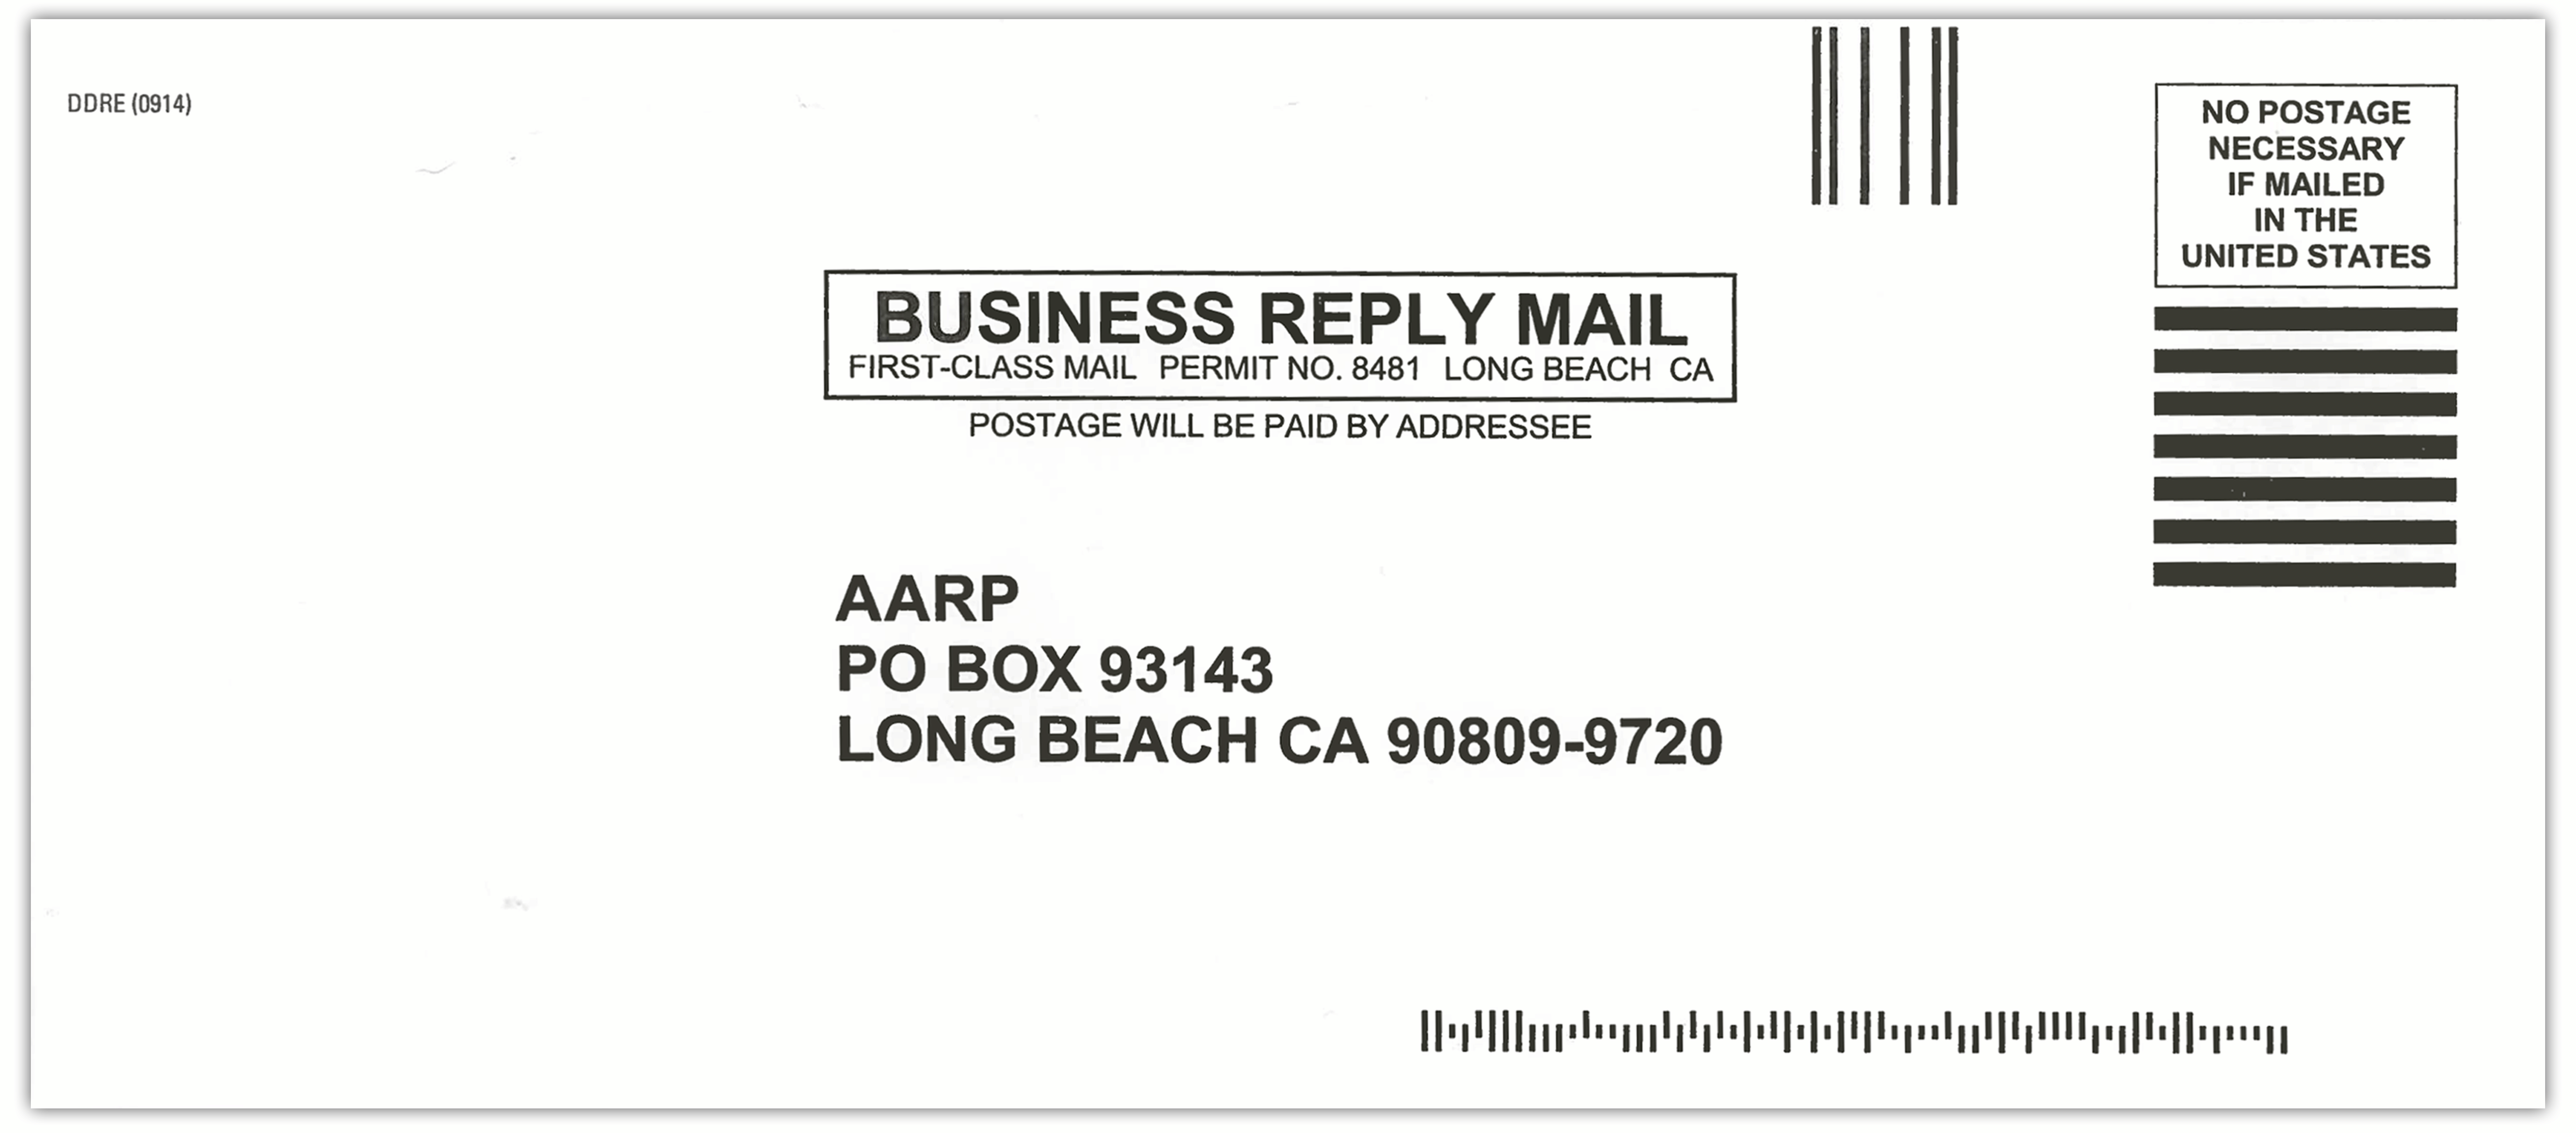 aarp opt out of mailings